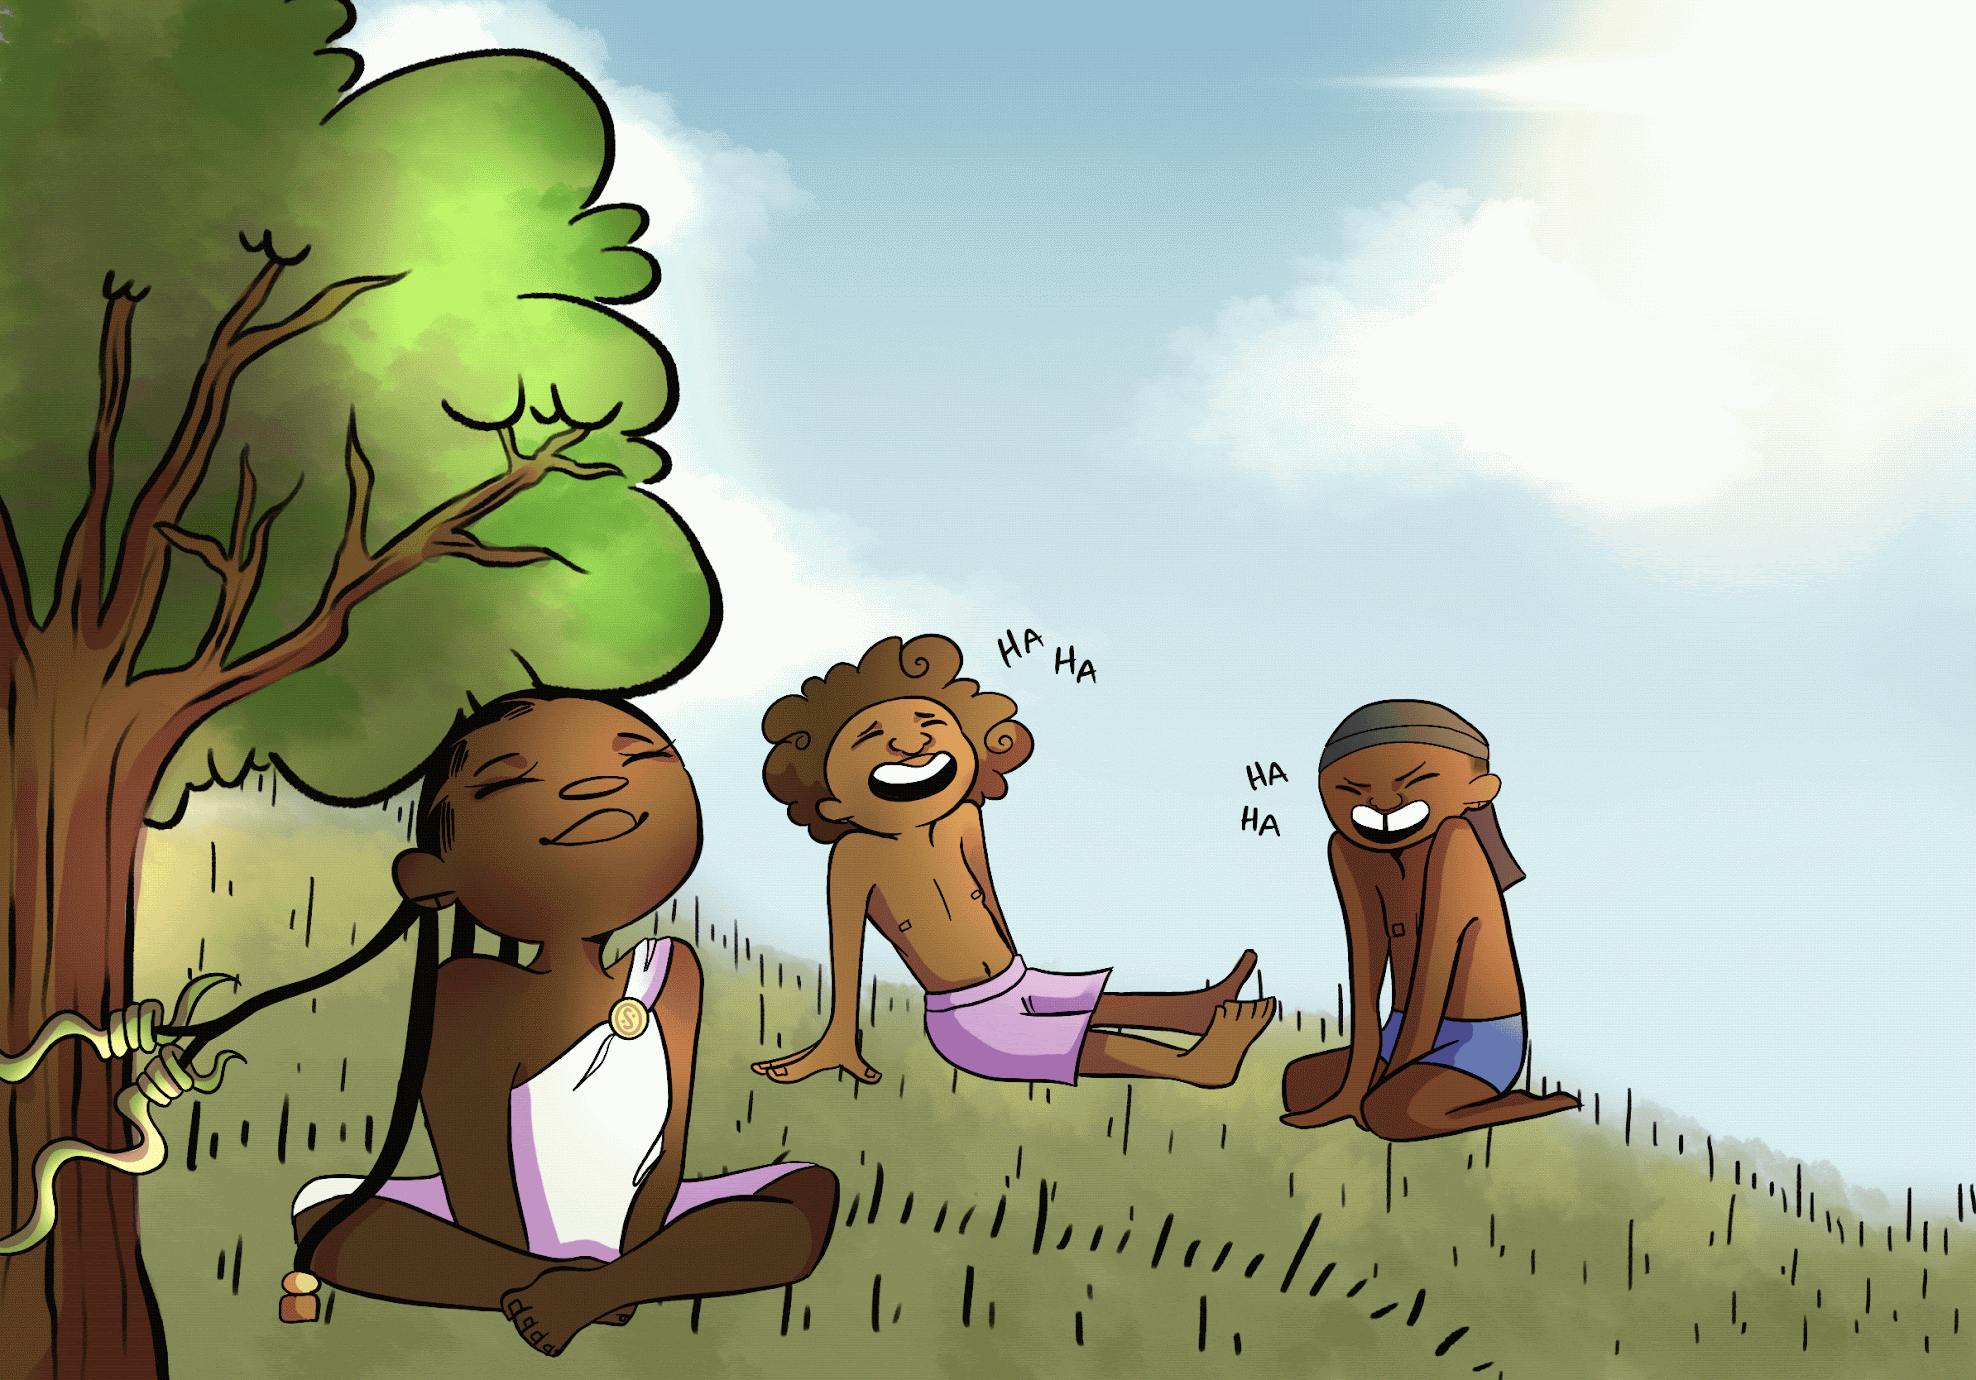 Two boys in swim trunks laugh while two snakes braid a girl’s hair: she wears a pink toga and sits under a tree.